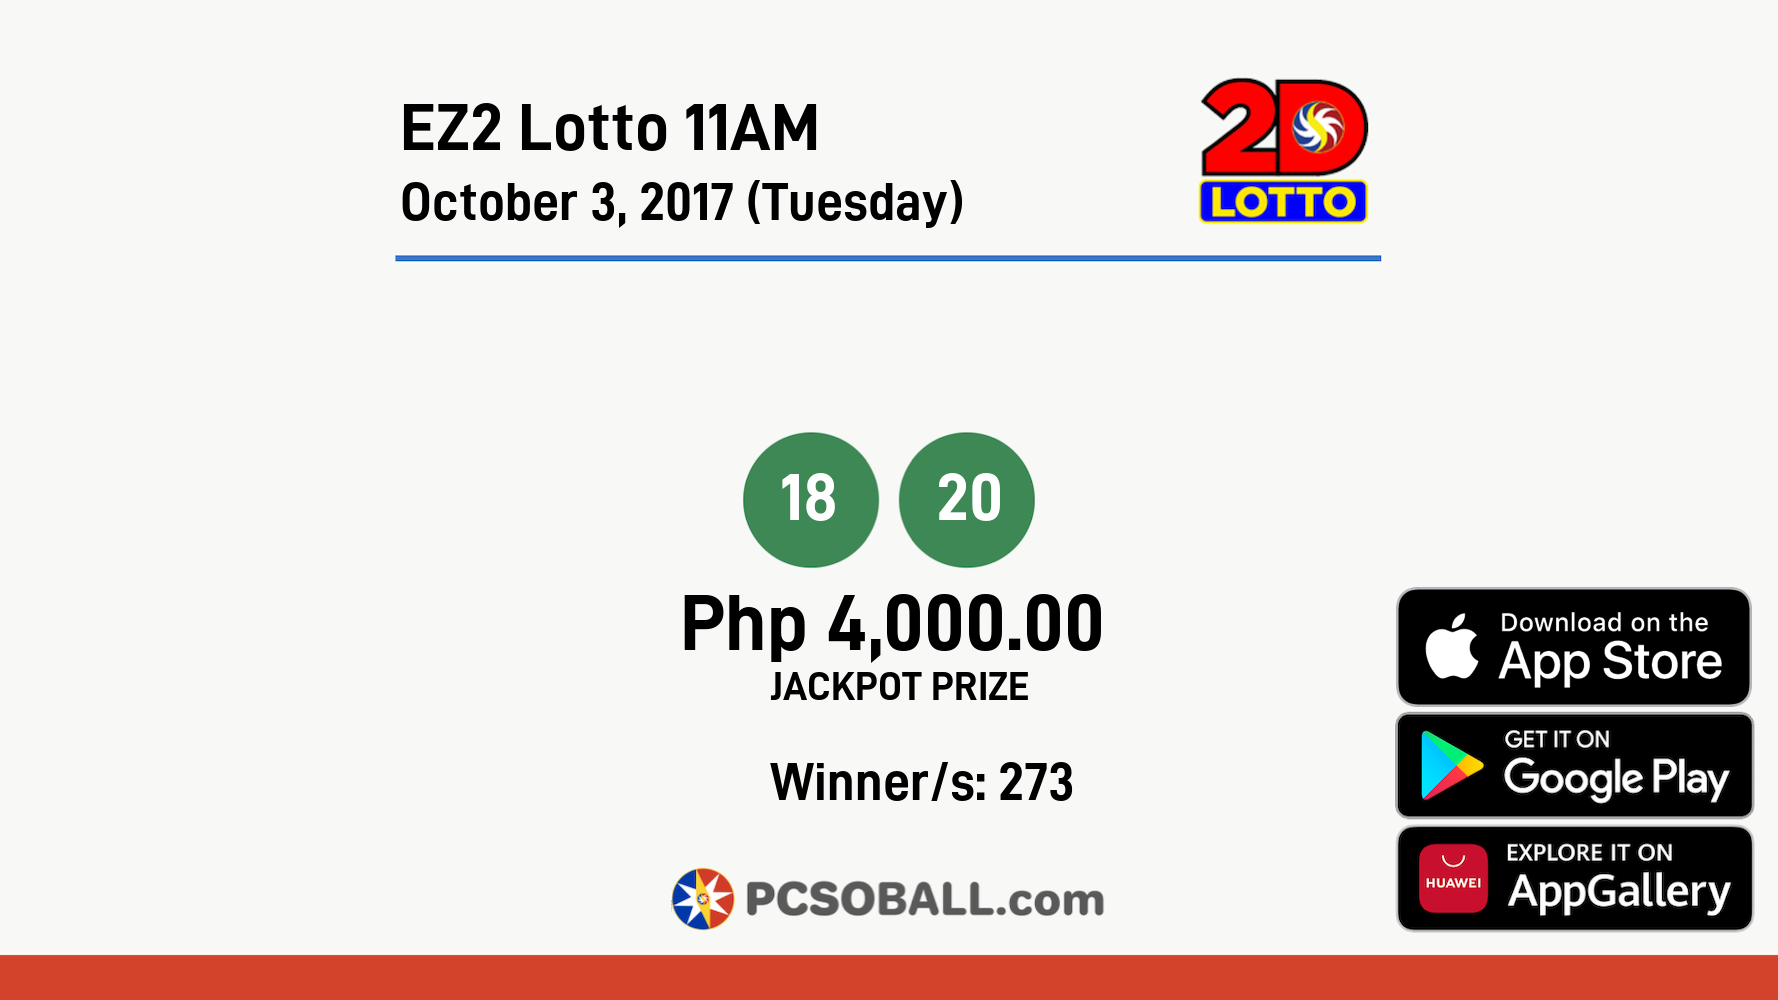 EZ2 Lotto 11AM October 3, 2017 (Tuesday) Result